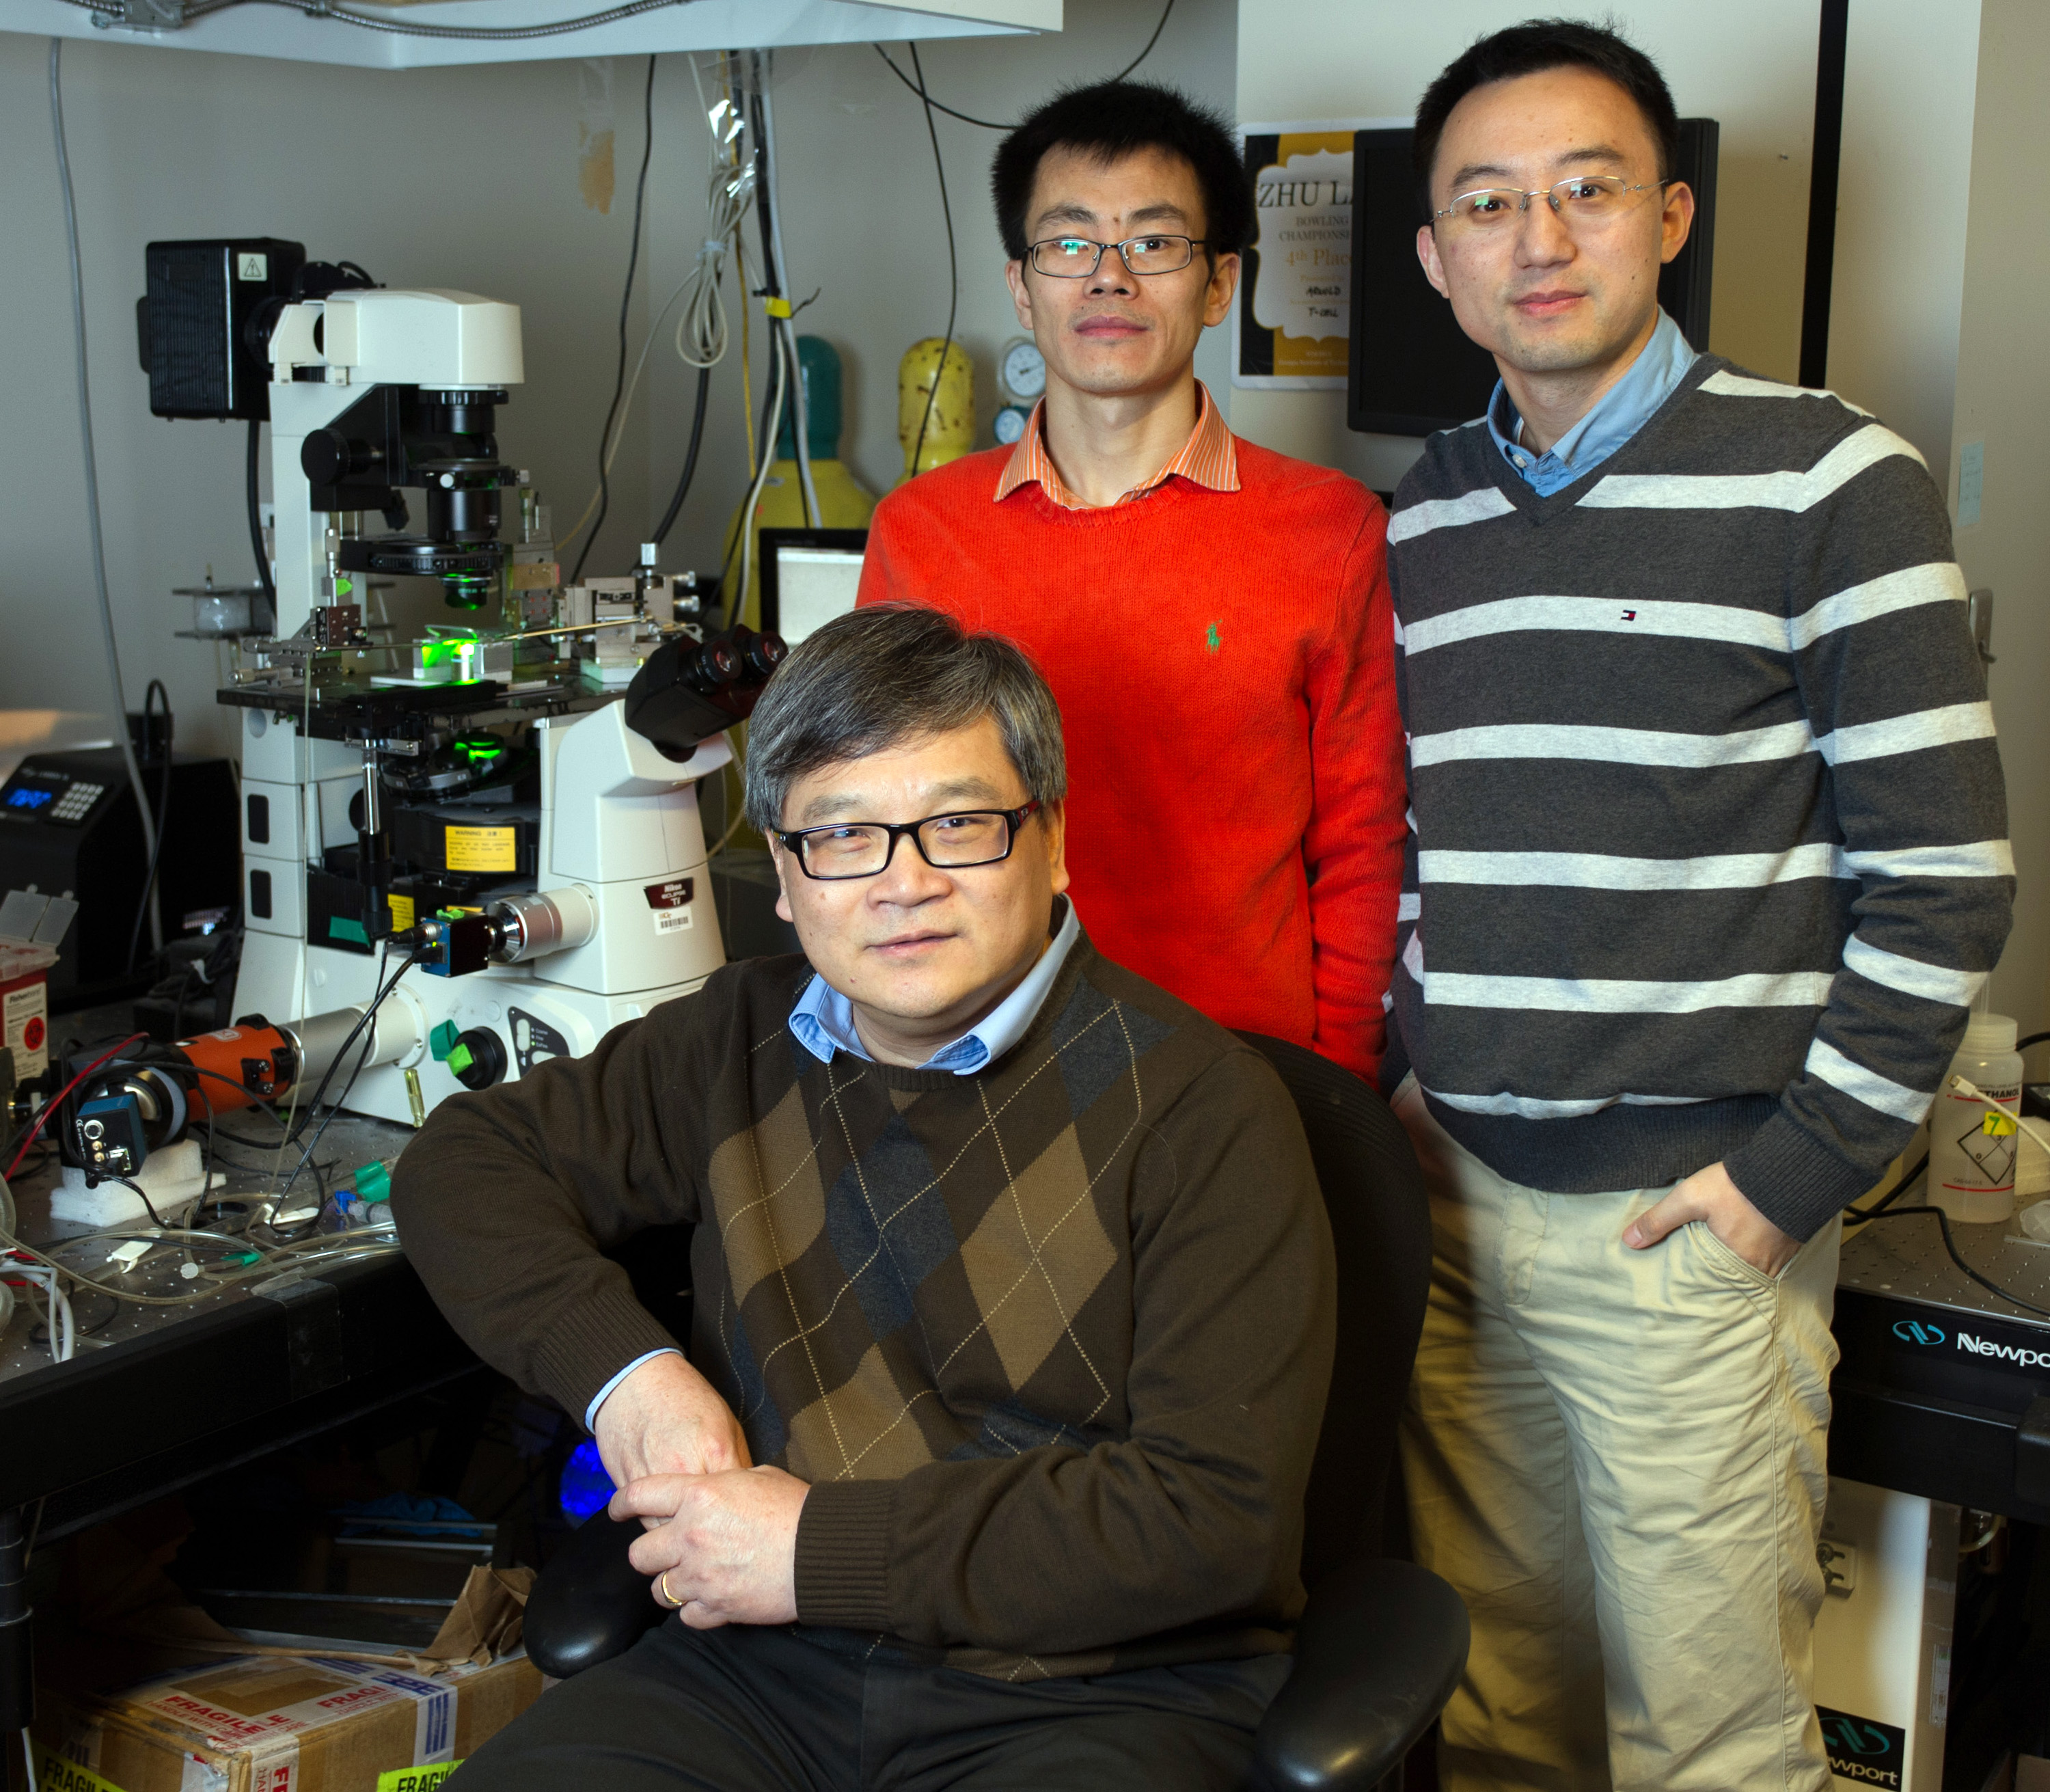 Researchers are shown with biomembrane force probe equipment. They are (l-r) Cheng Zhu (seated), Baoyu Liu and Wei Chen. (Georgia Tech Photo: Rob Felt)